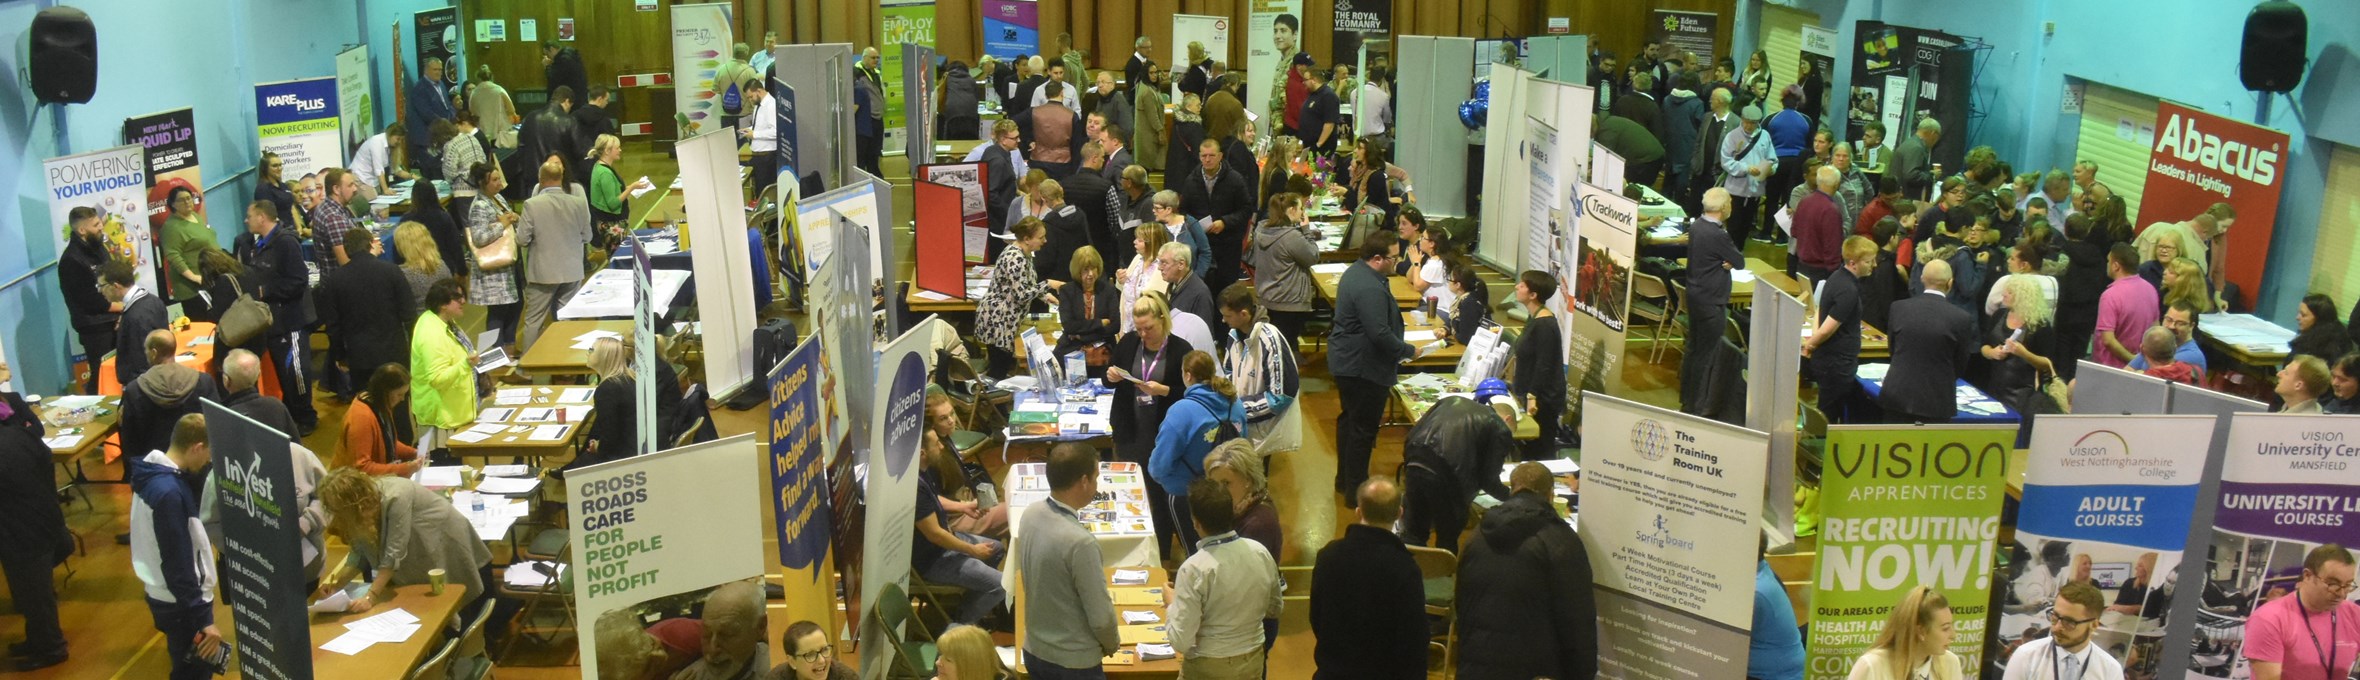 Ashfield careers and jobs fair at the Festival Hall, Kirkby in Ashfield.